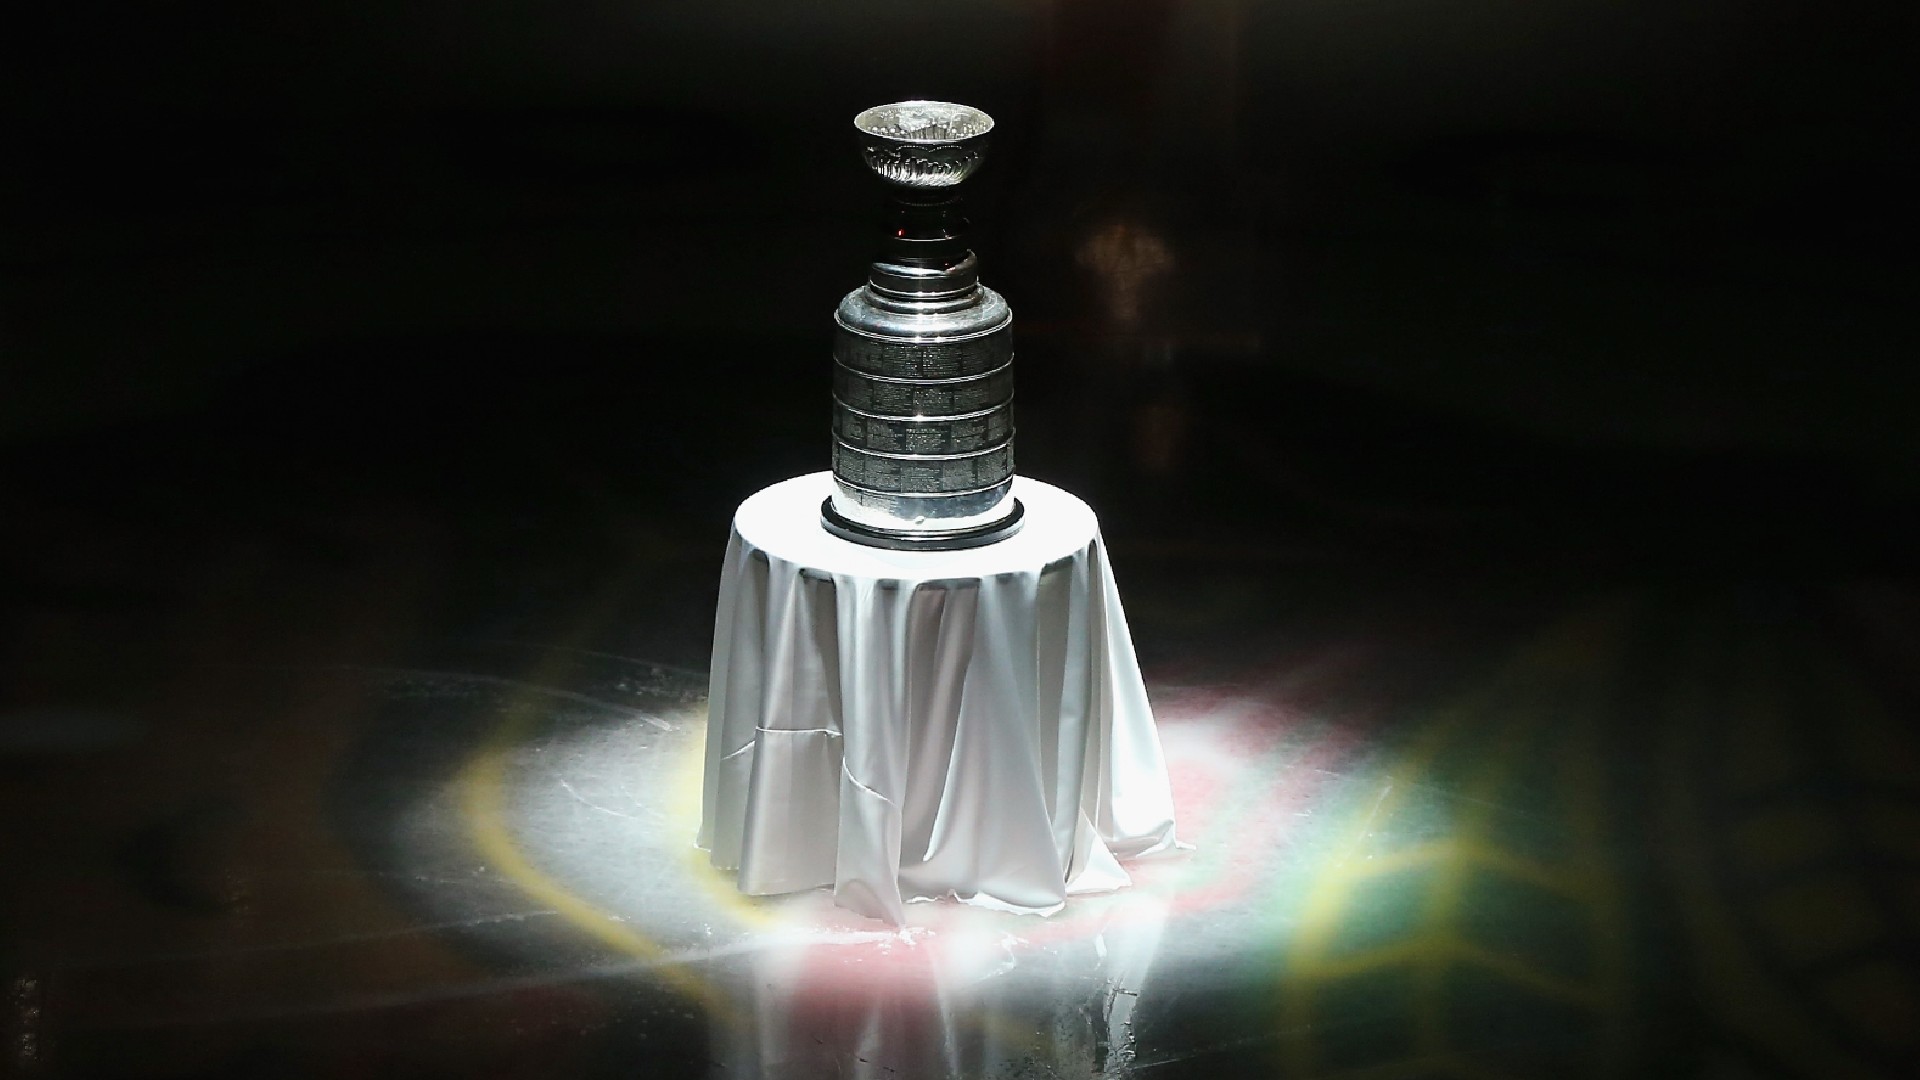 Stanley Cup Wallpapers